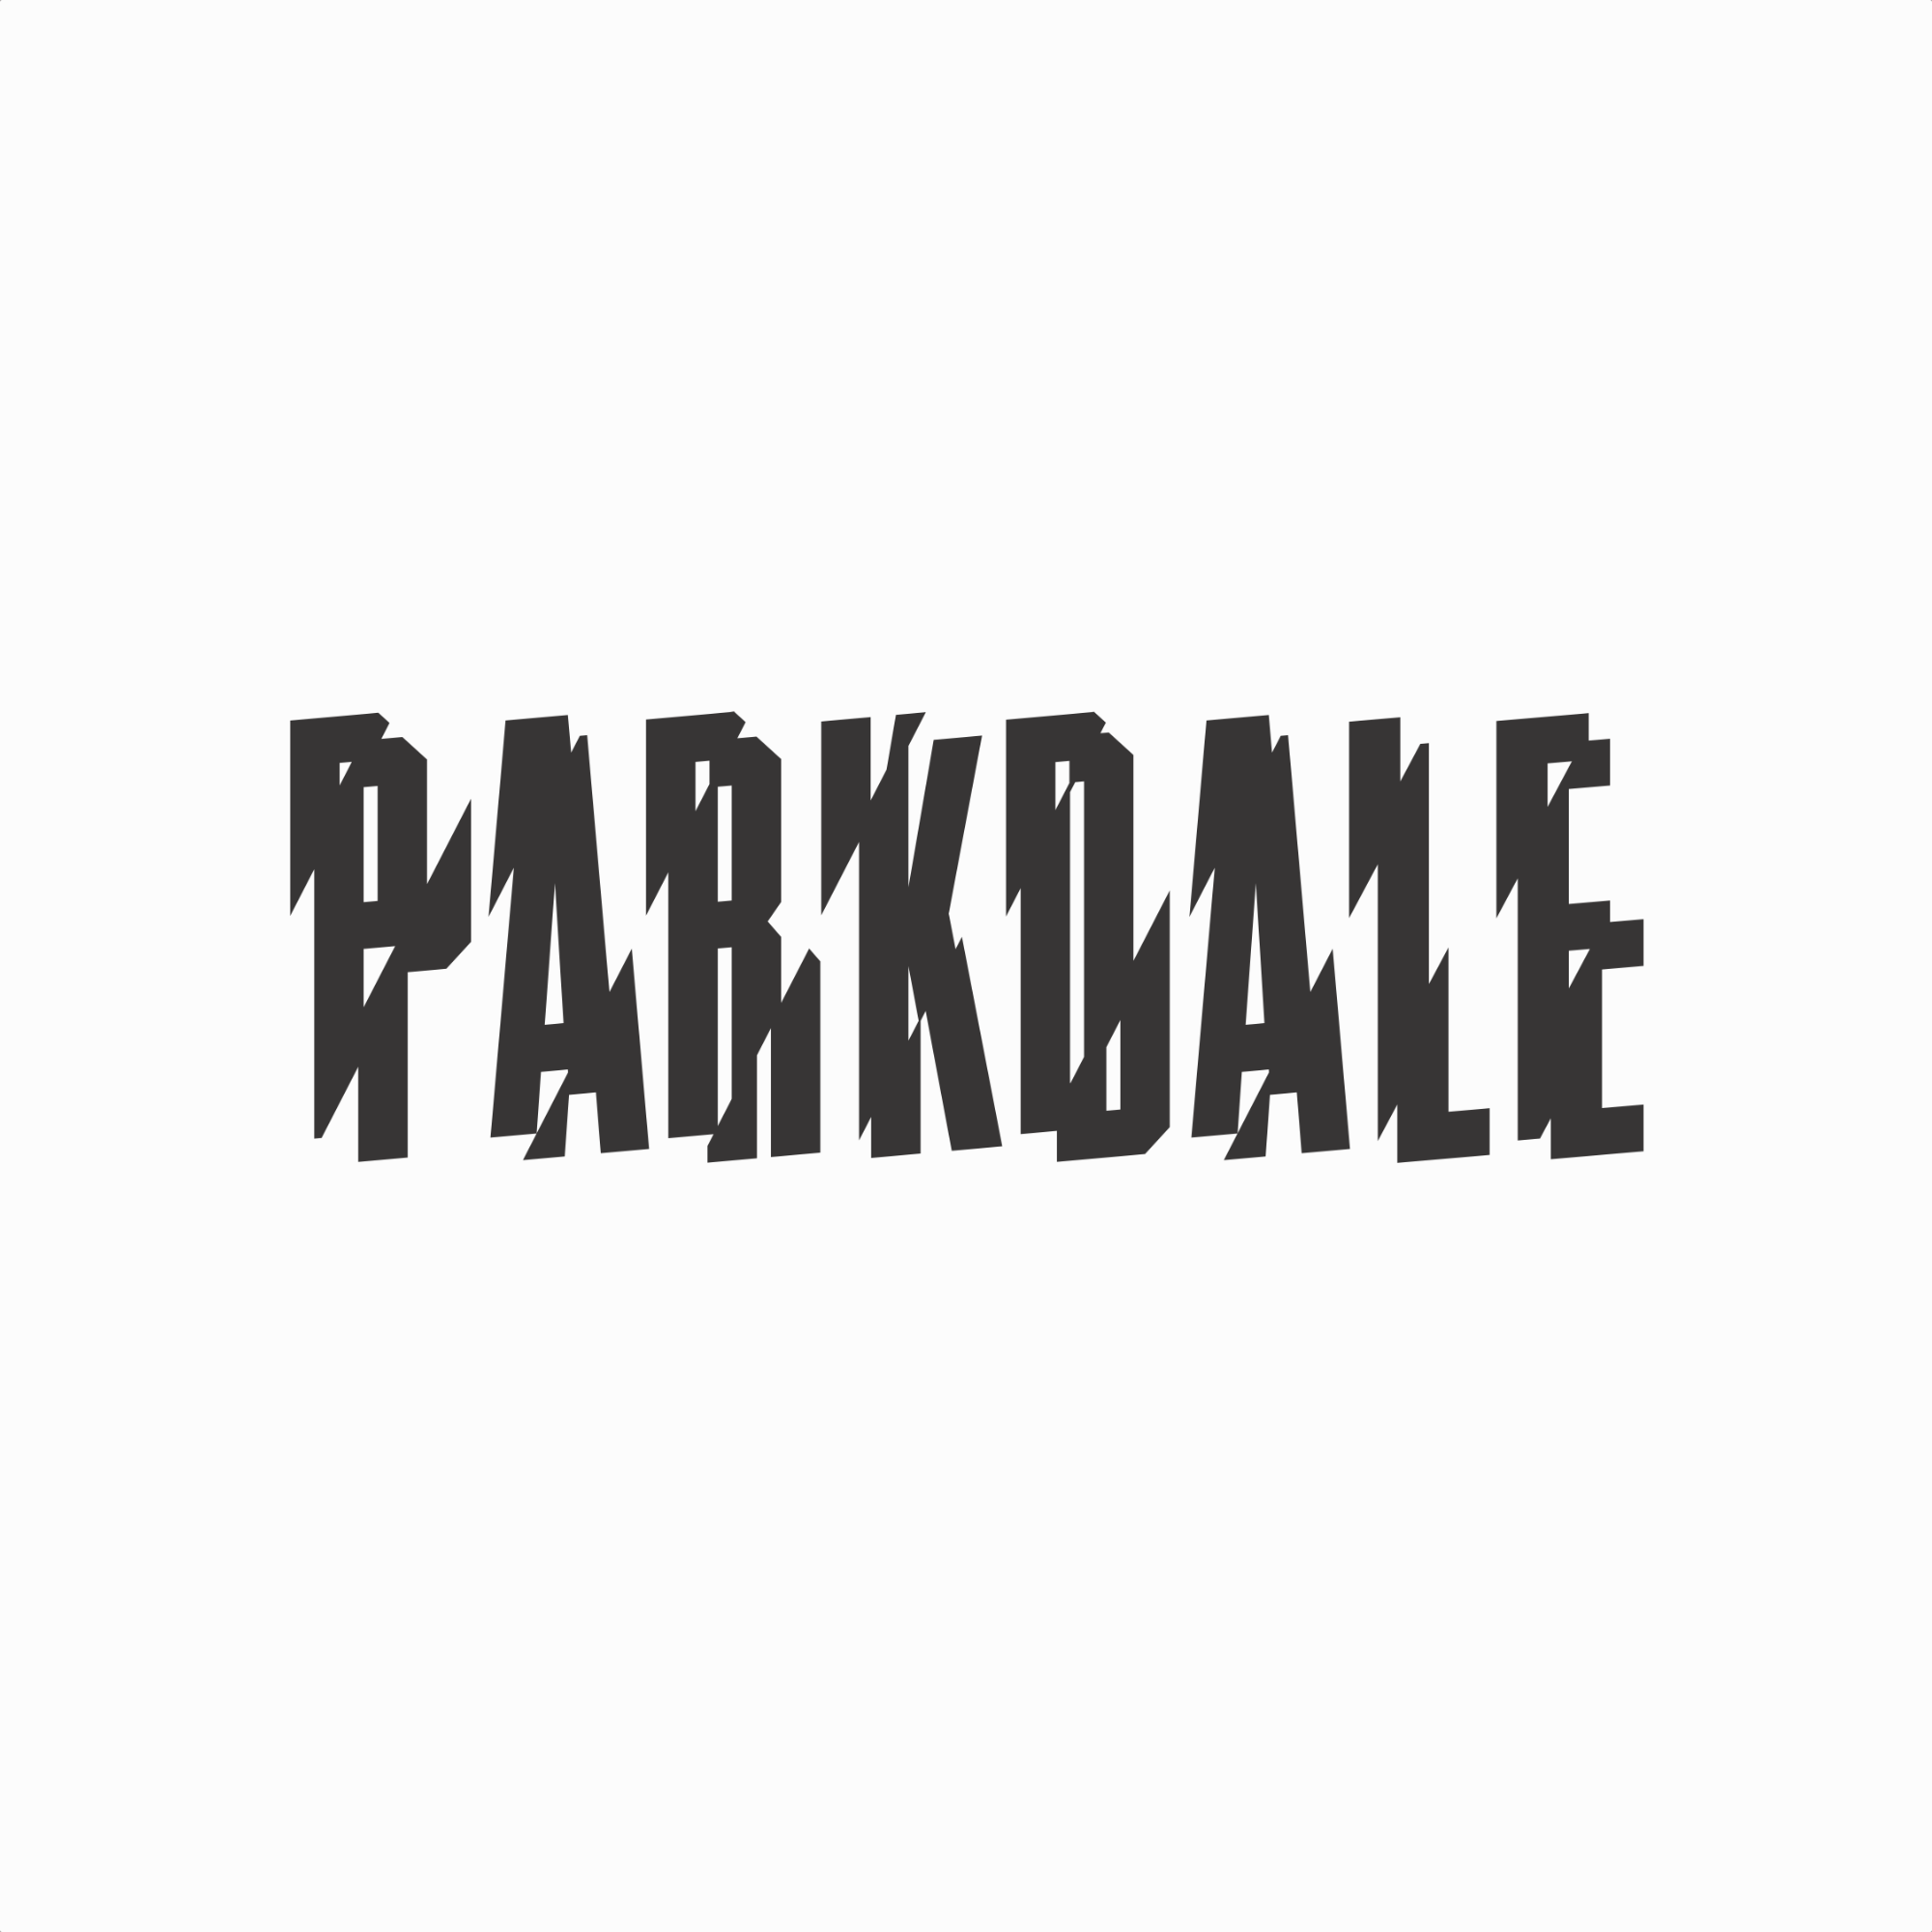 Parkdale Road Runners